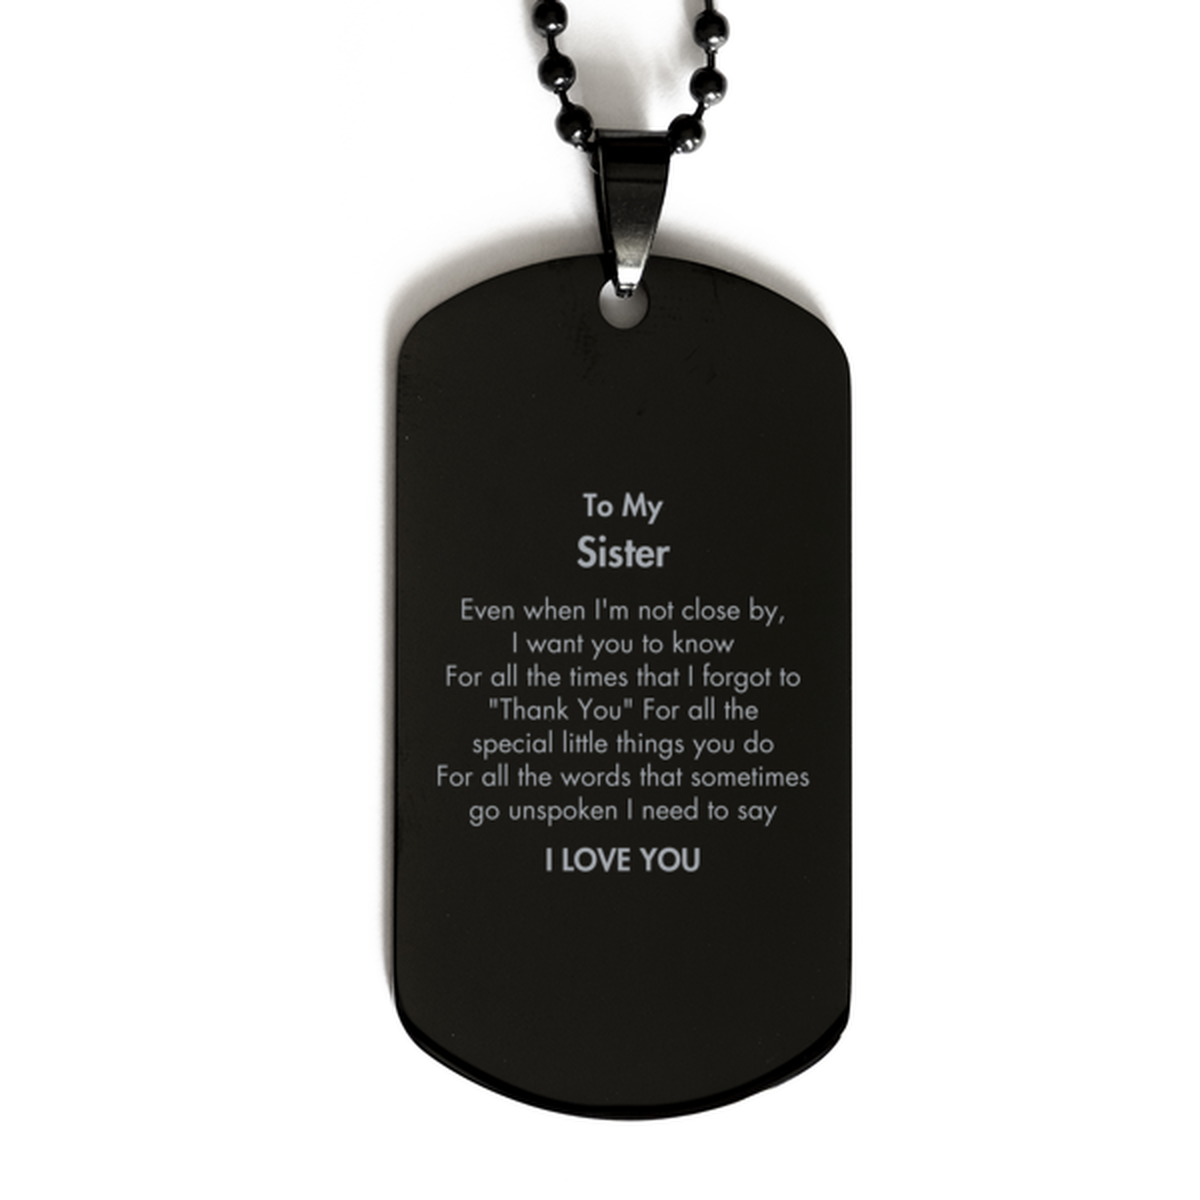 Thank You Gifts for Sister, Keepsake Black Dog Tag Gifts for Sister Birthday Mother's day Father's Day Sister For all the words That sometimes go unspoken I need to say I LOVE YOU